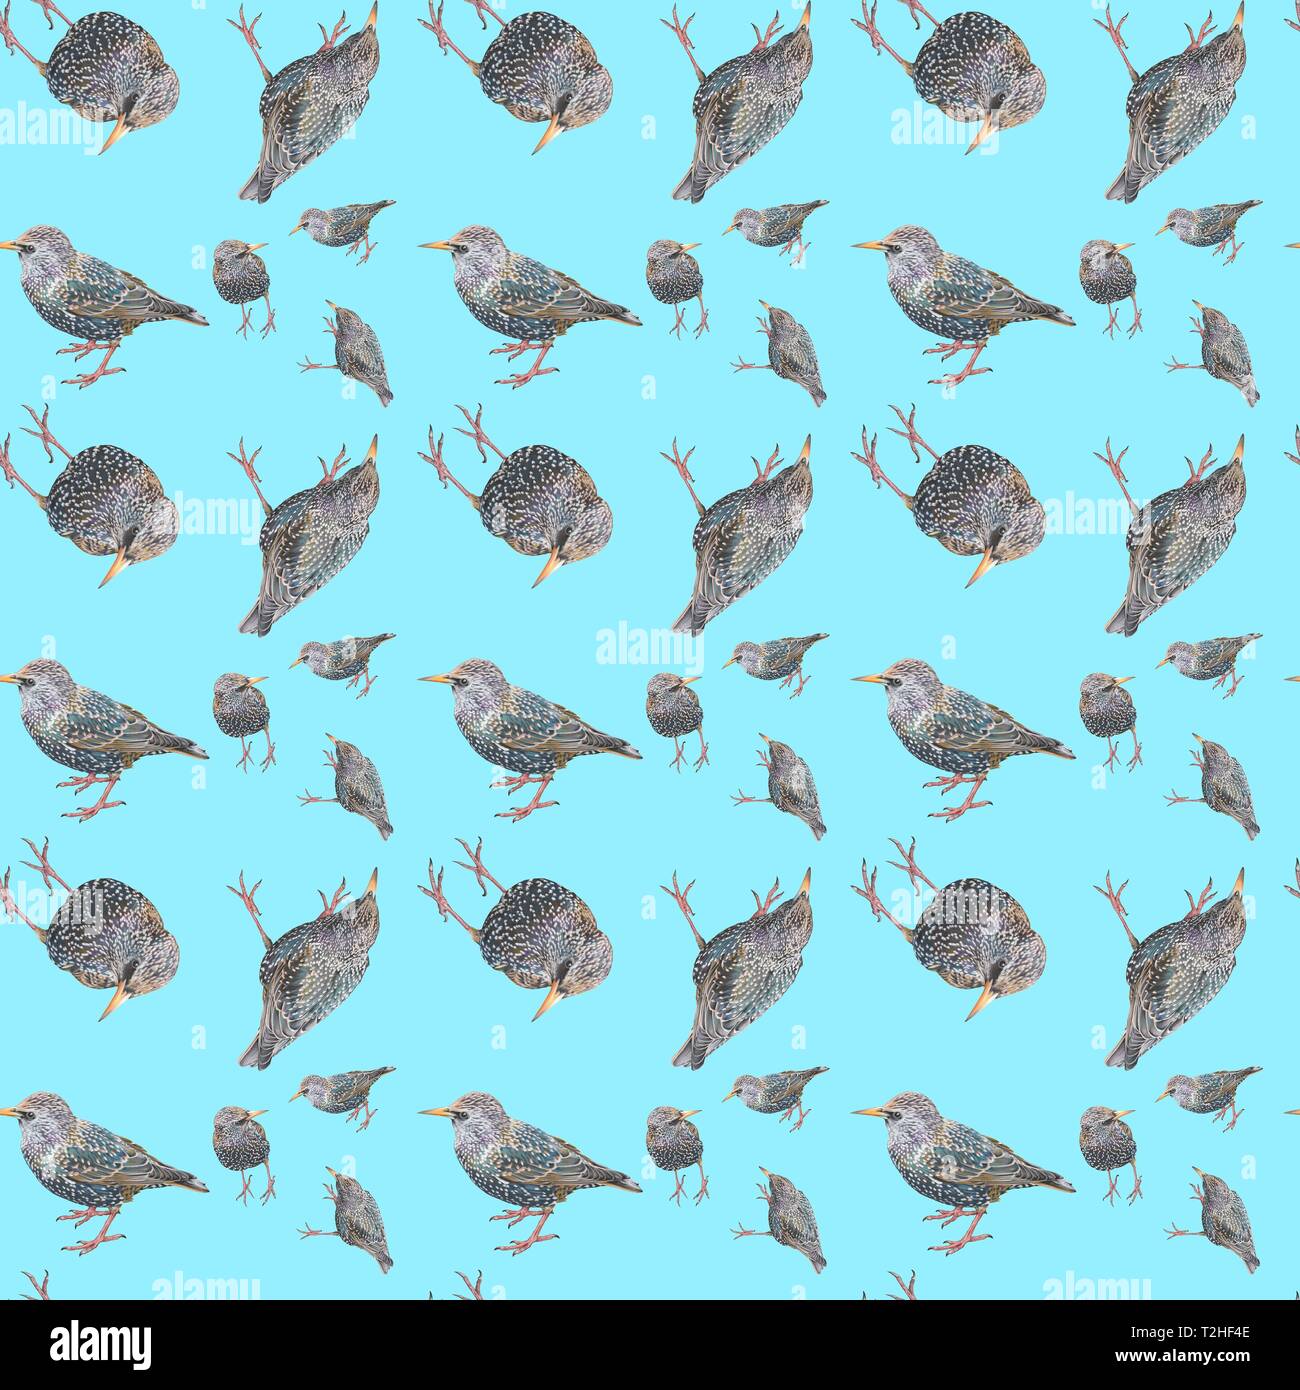 Wallpaper, wrapping paper, seamless pattern, bird figure, starlings, background light blue, Germany Stock Photo